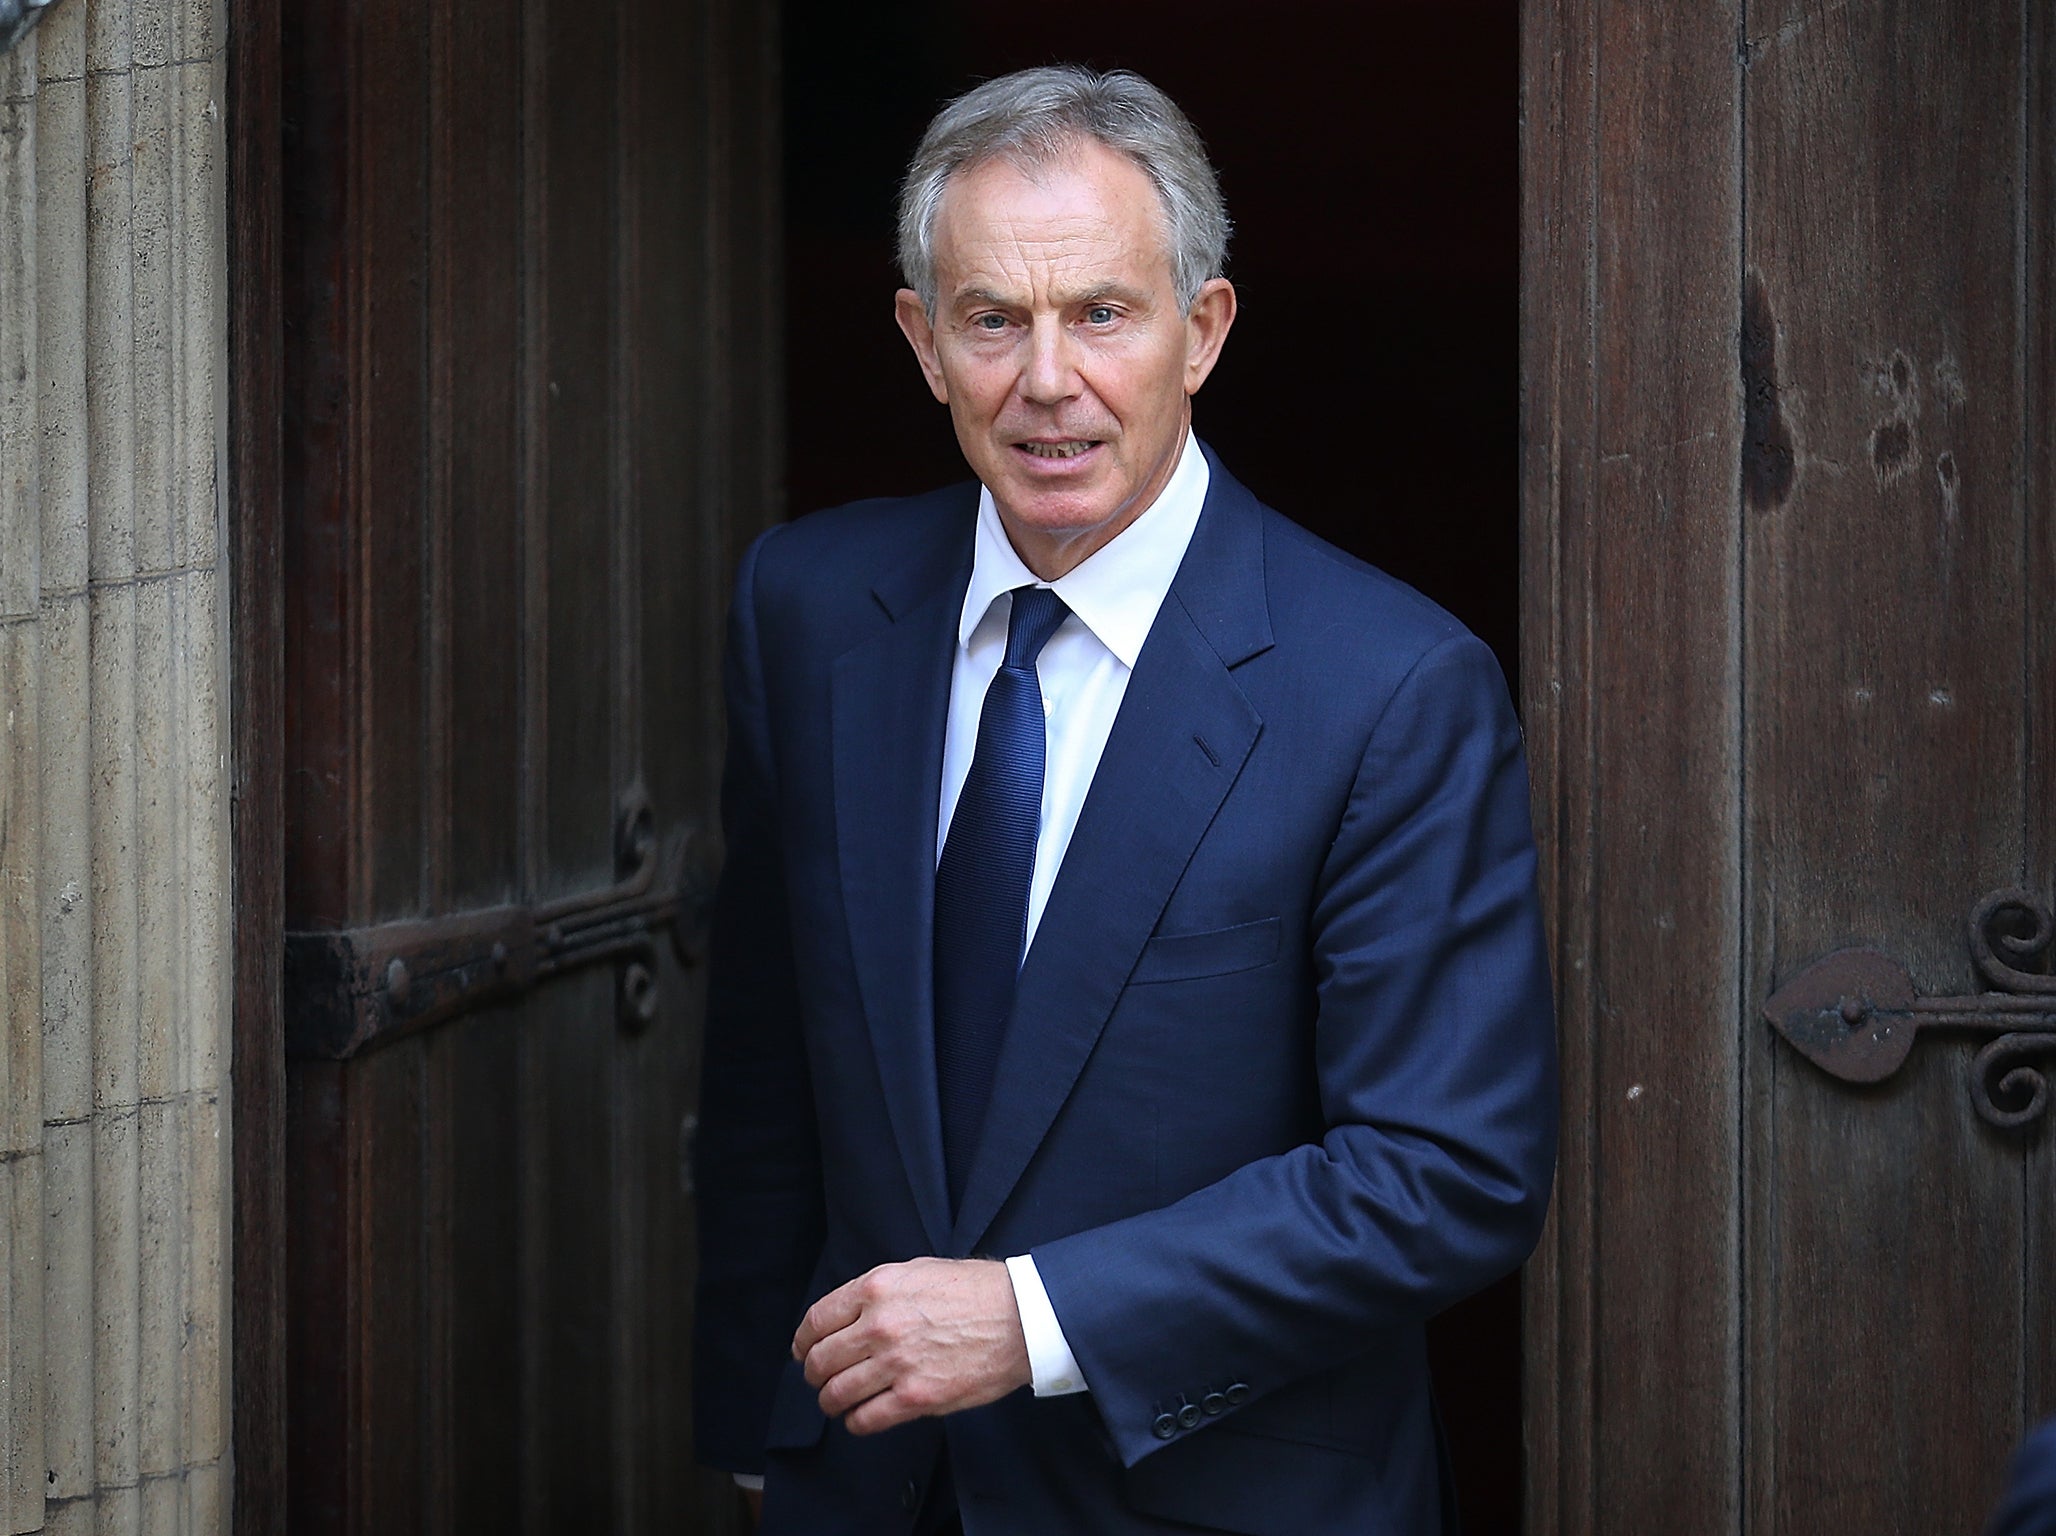 New Labour under Tony Blair made mistakes, but we must also remember the achievements